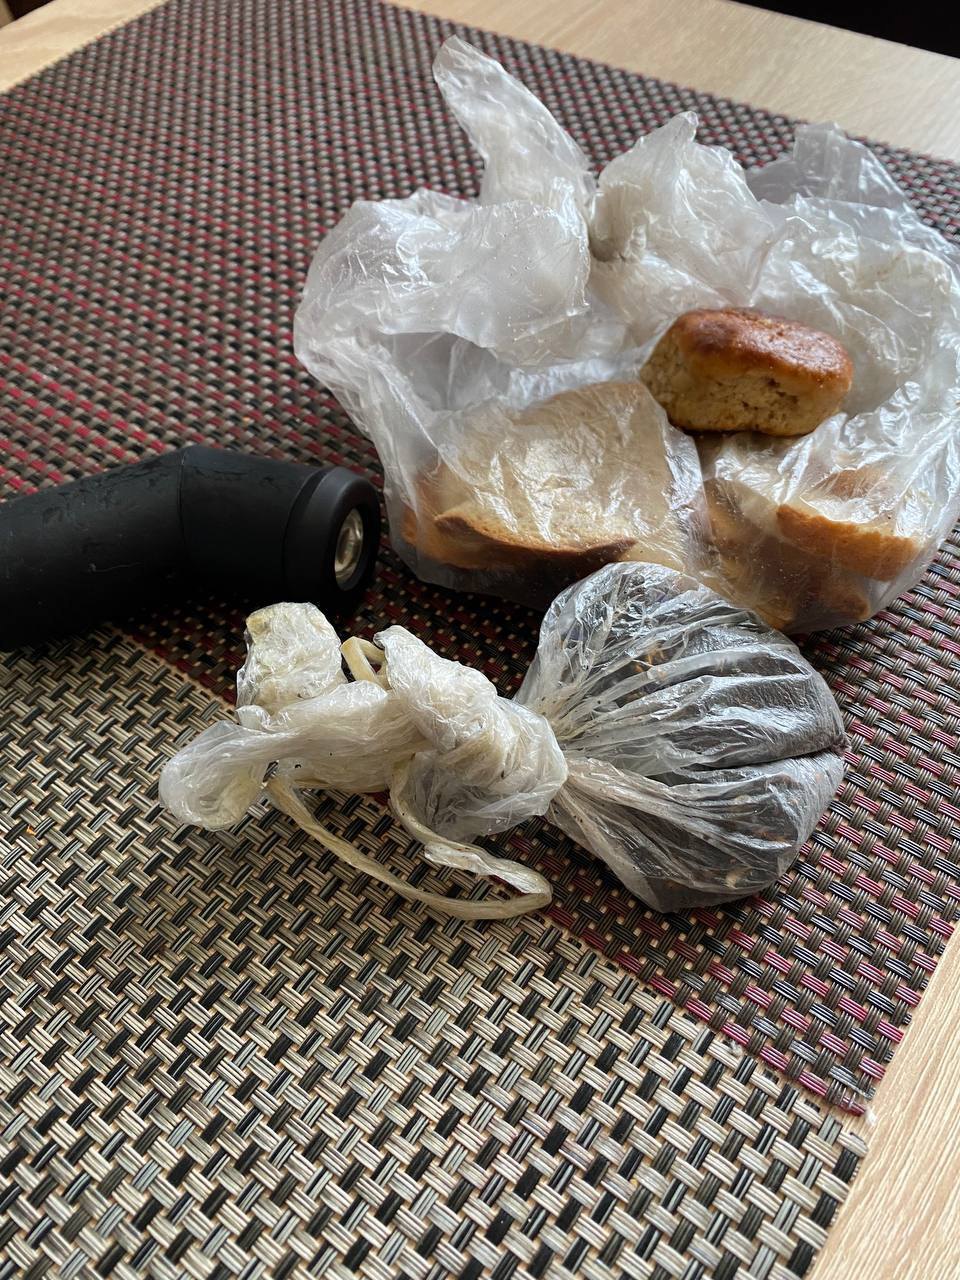 Dry bread, flashlight, and homemade cookies that Karyna, Yulia, and their parents cooked in Mariupol.